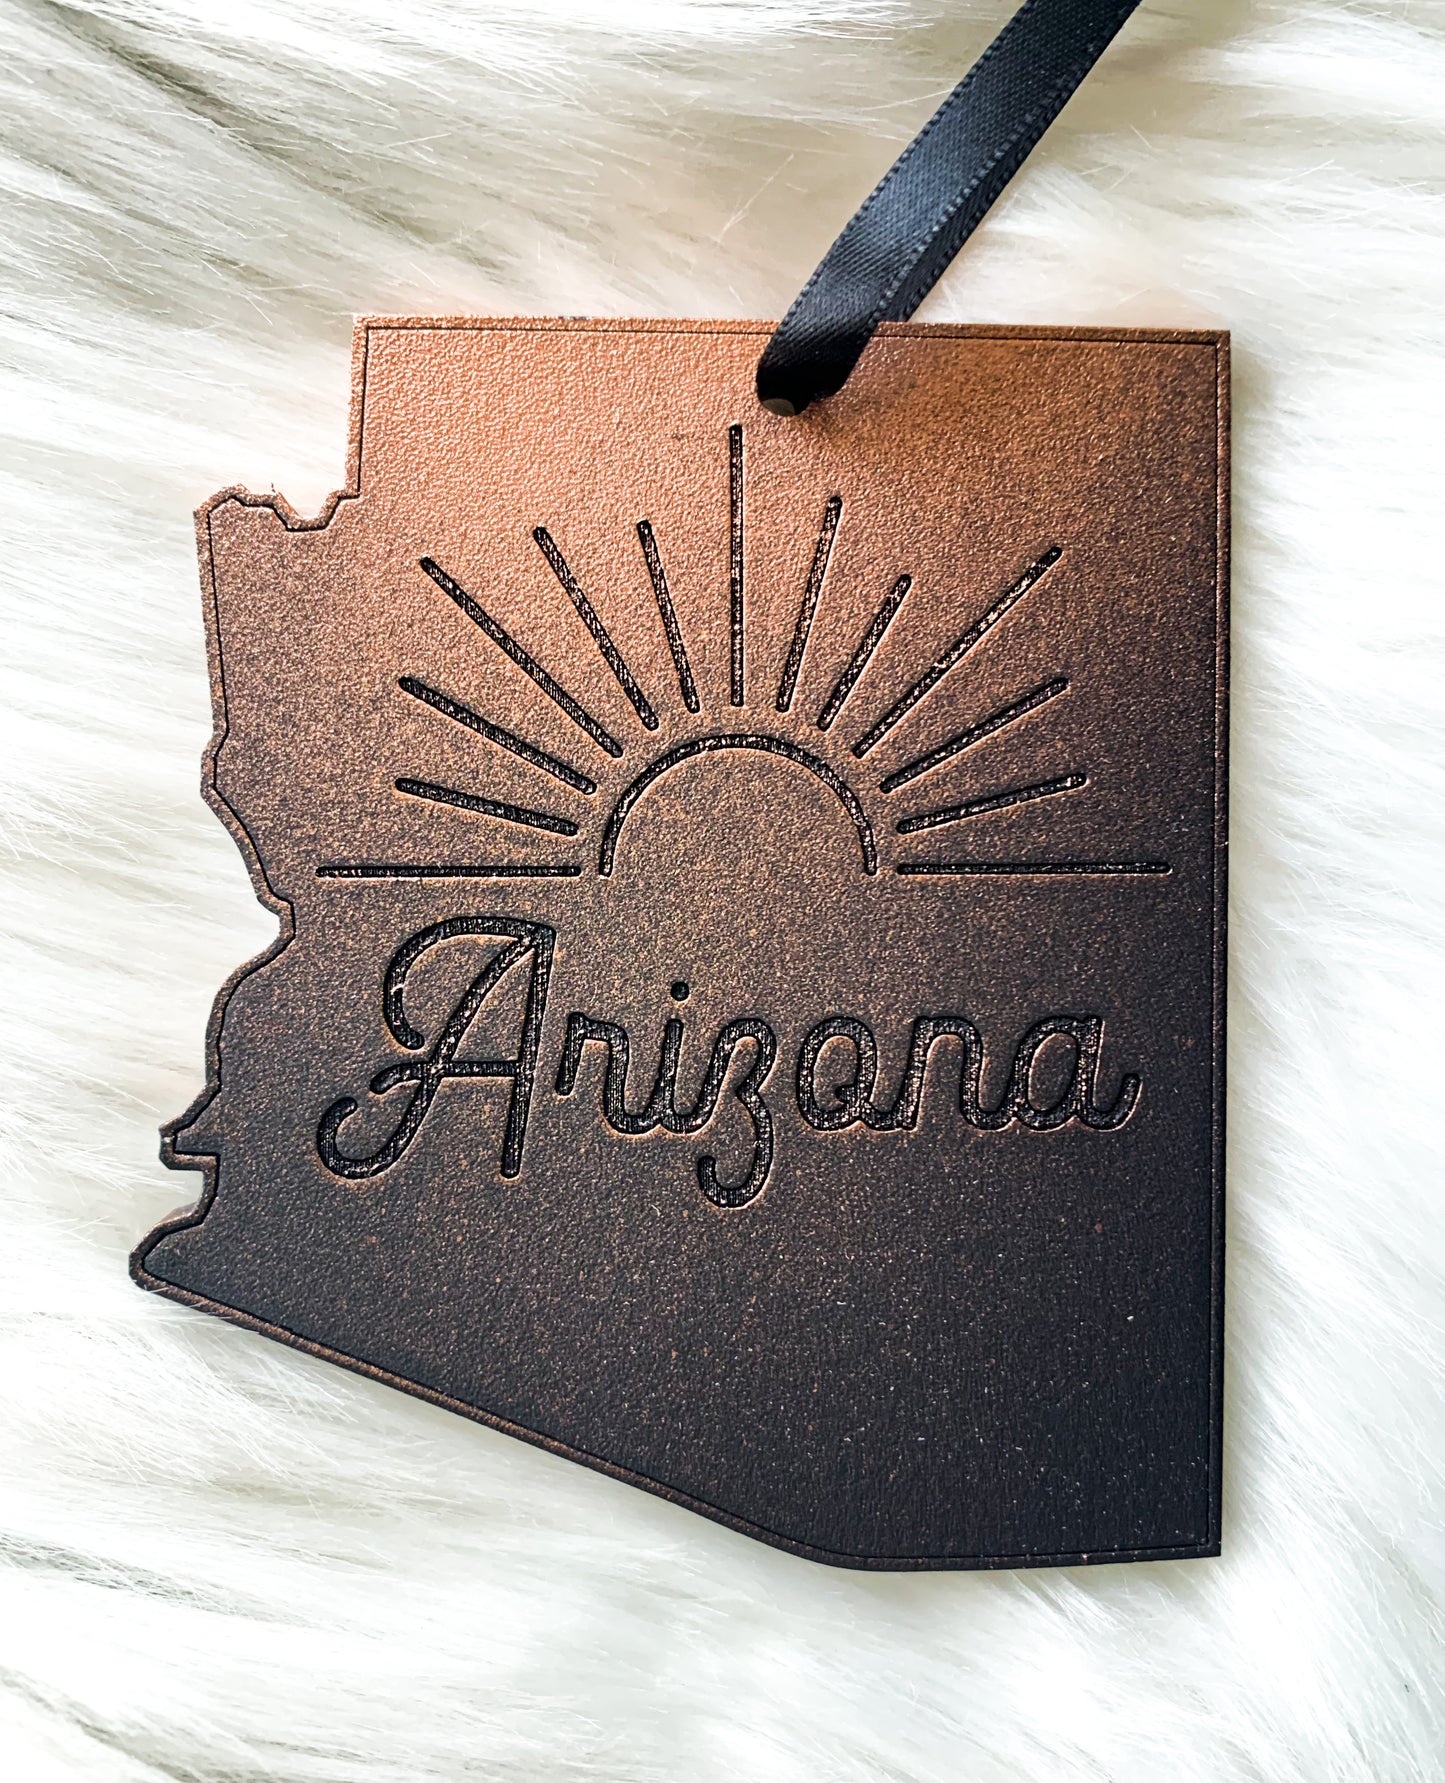 Black and Copper Painted Arizona Ornament